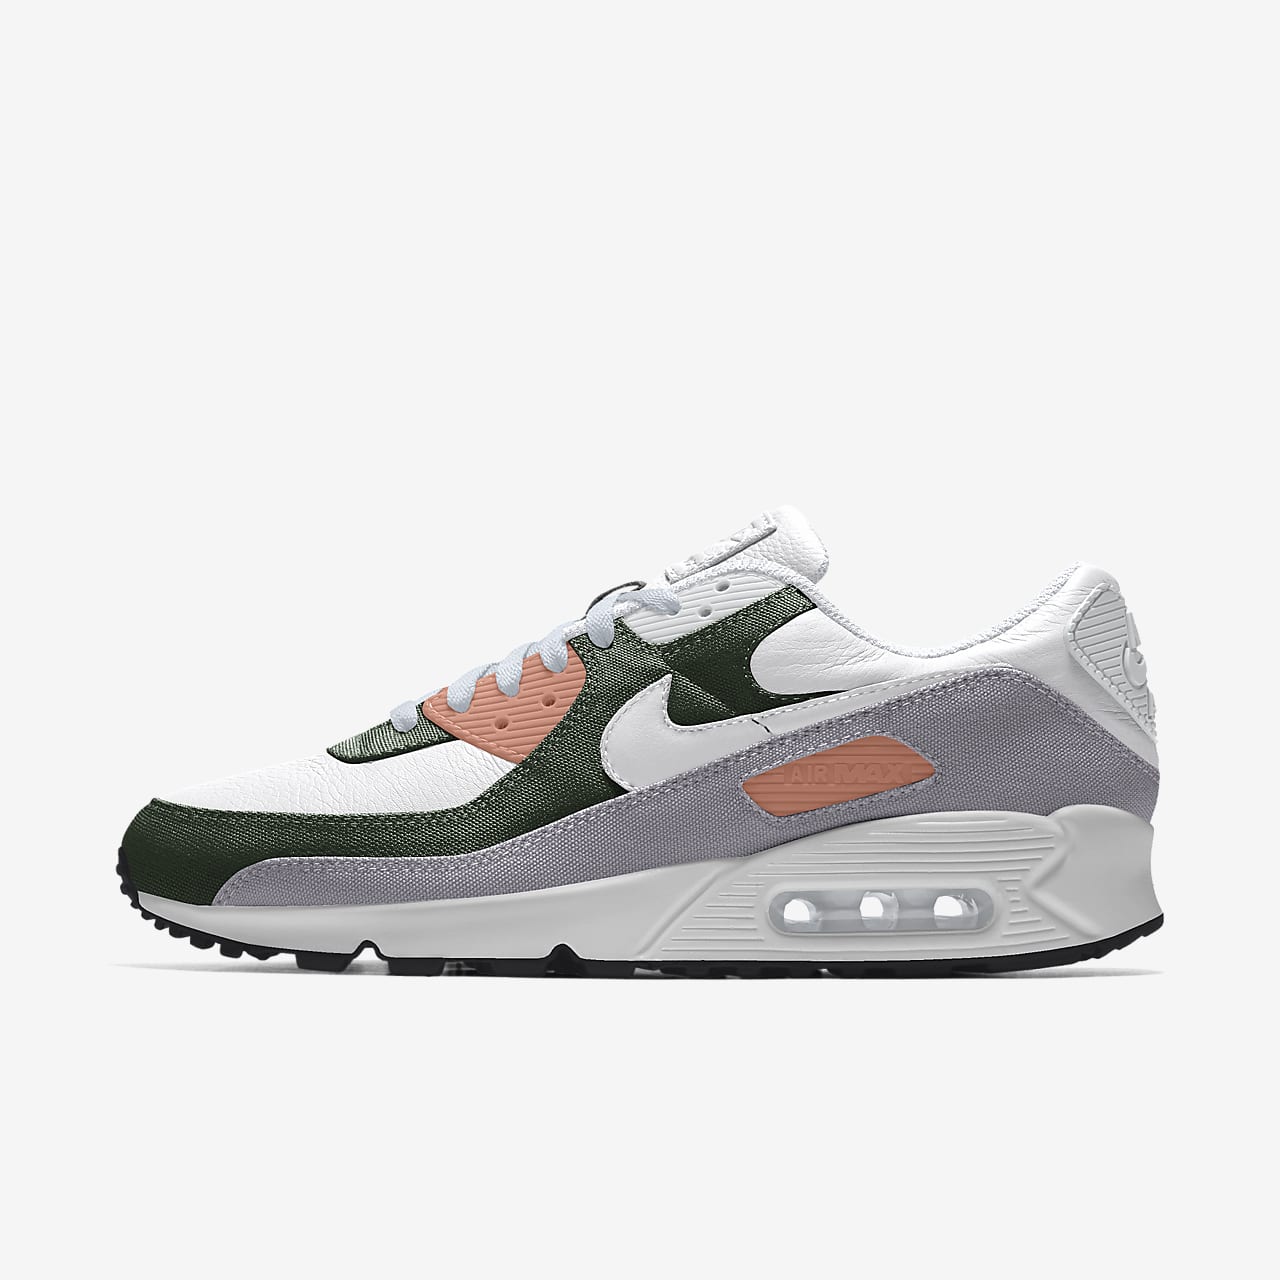 In most cases bond Irregularities Nike Air Max 90 By You Custom Men's Shoes. Nike.com